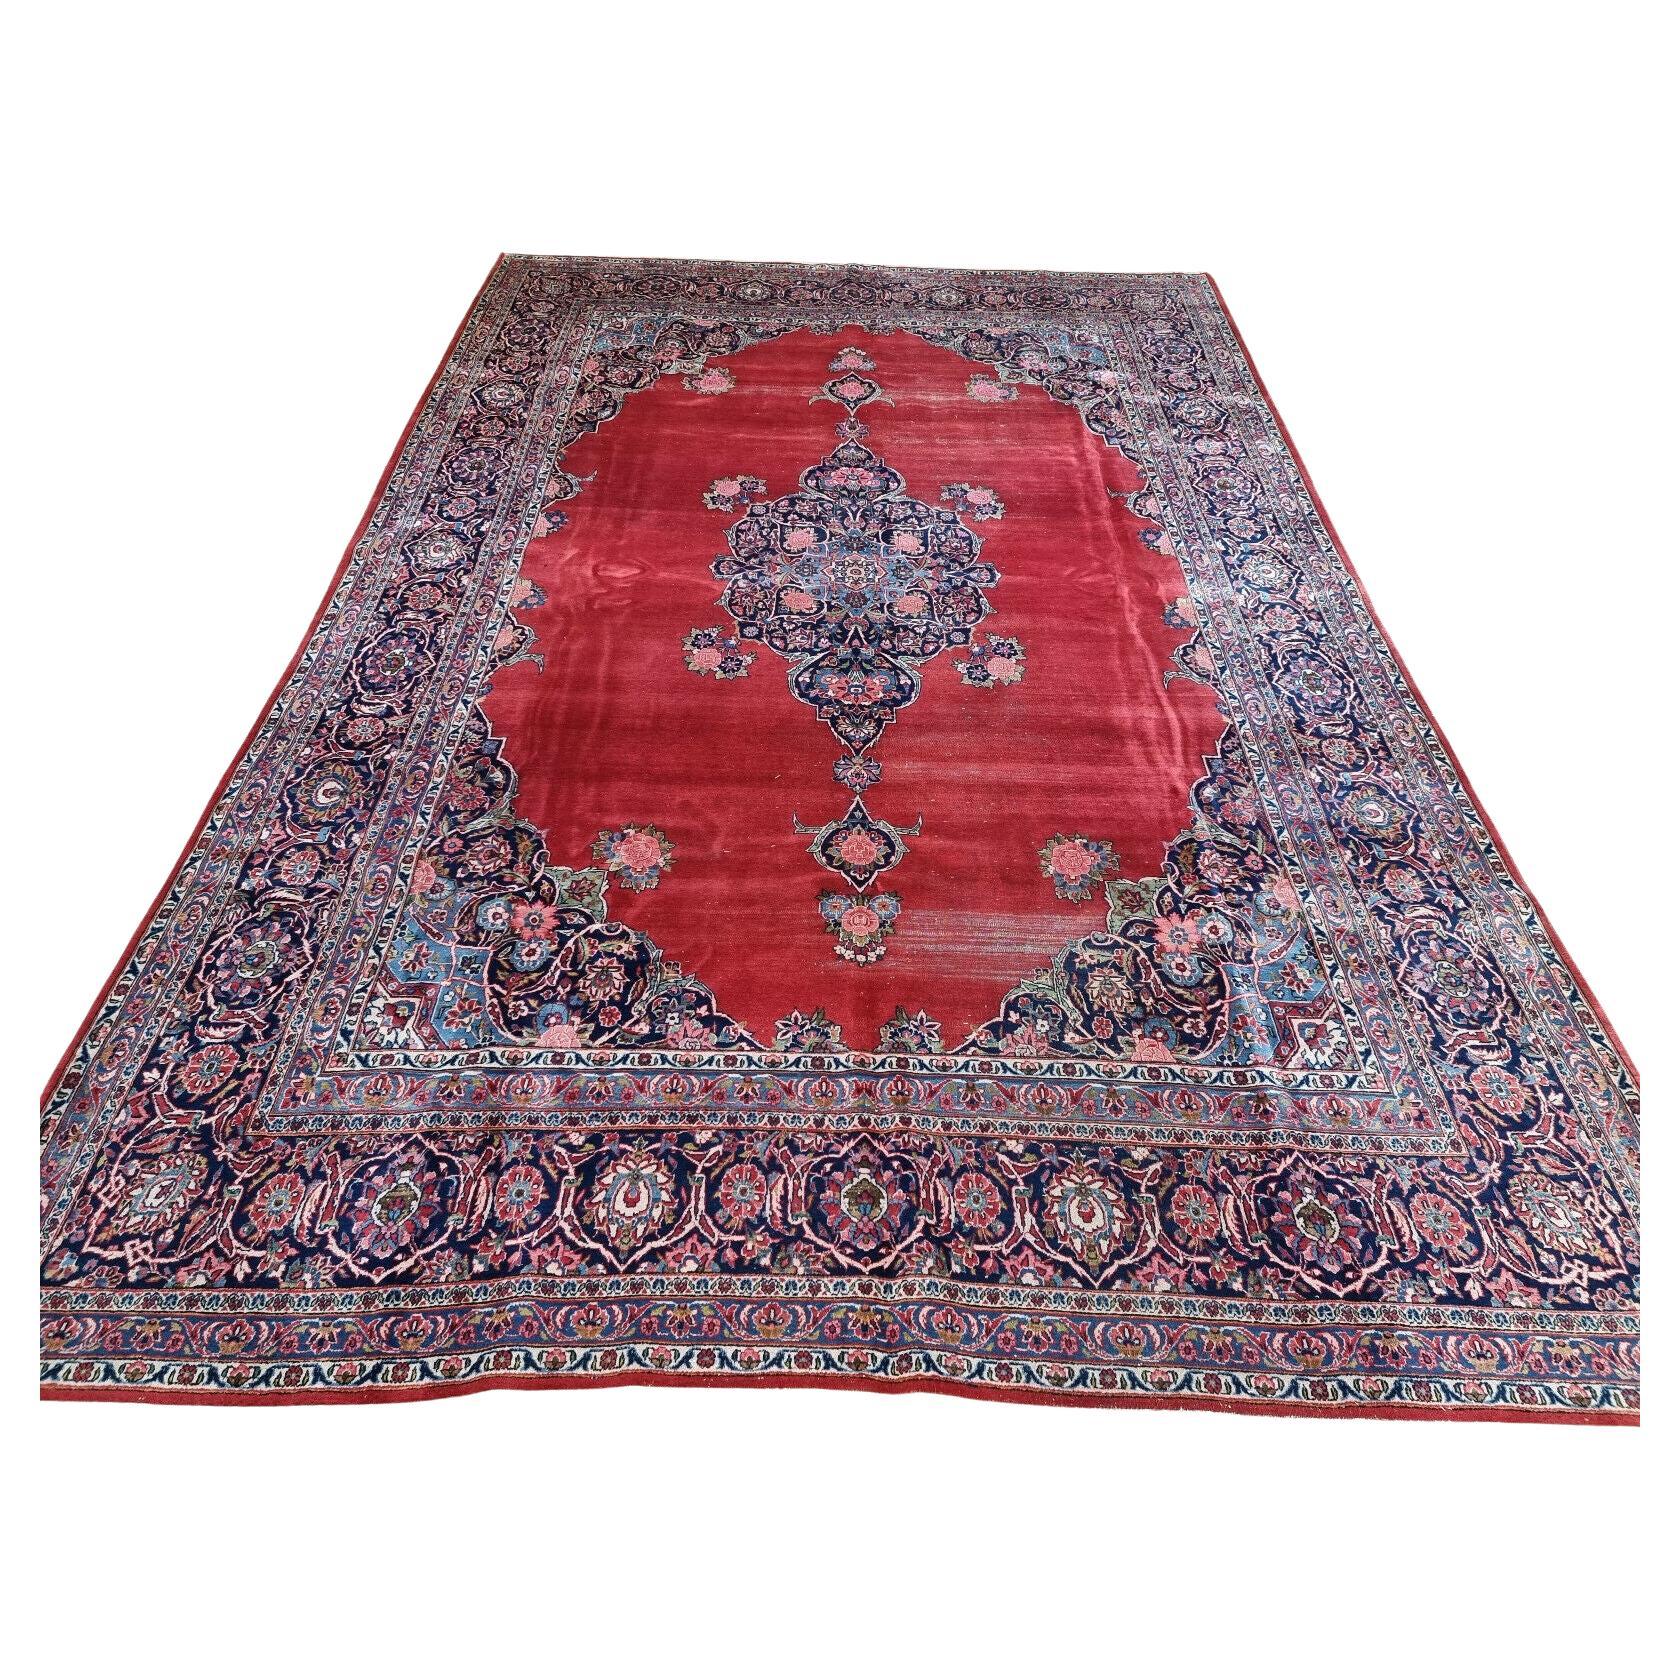 Handmade Antique Persian Style Kashan Distressed Rug 8.5' x 12.9', 1920s - 1D68 For Sale